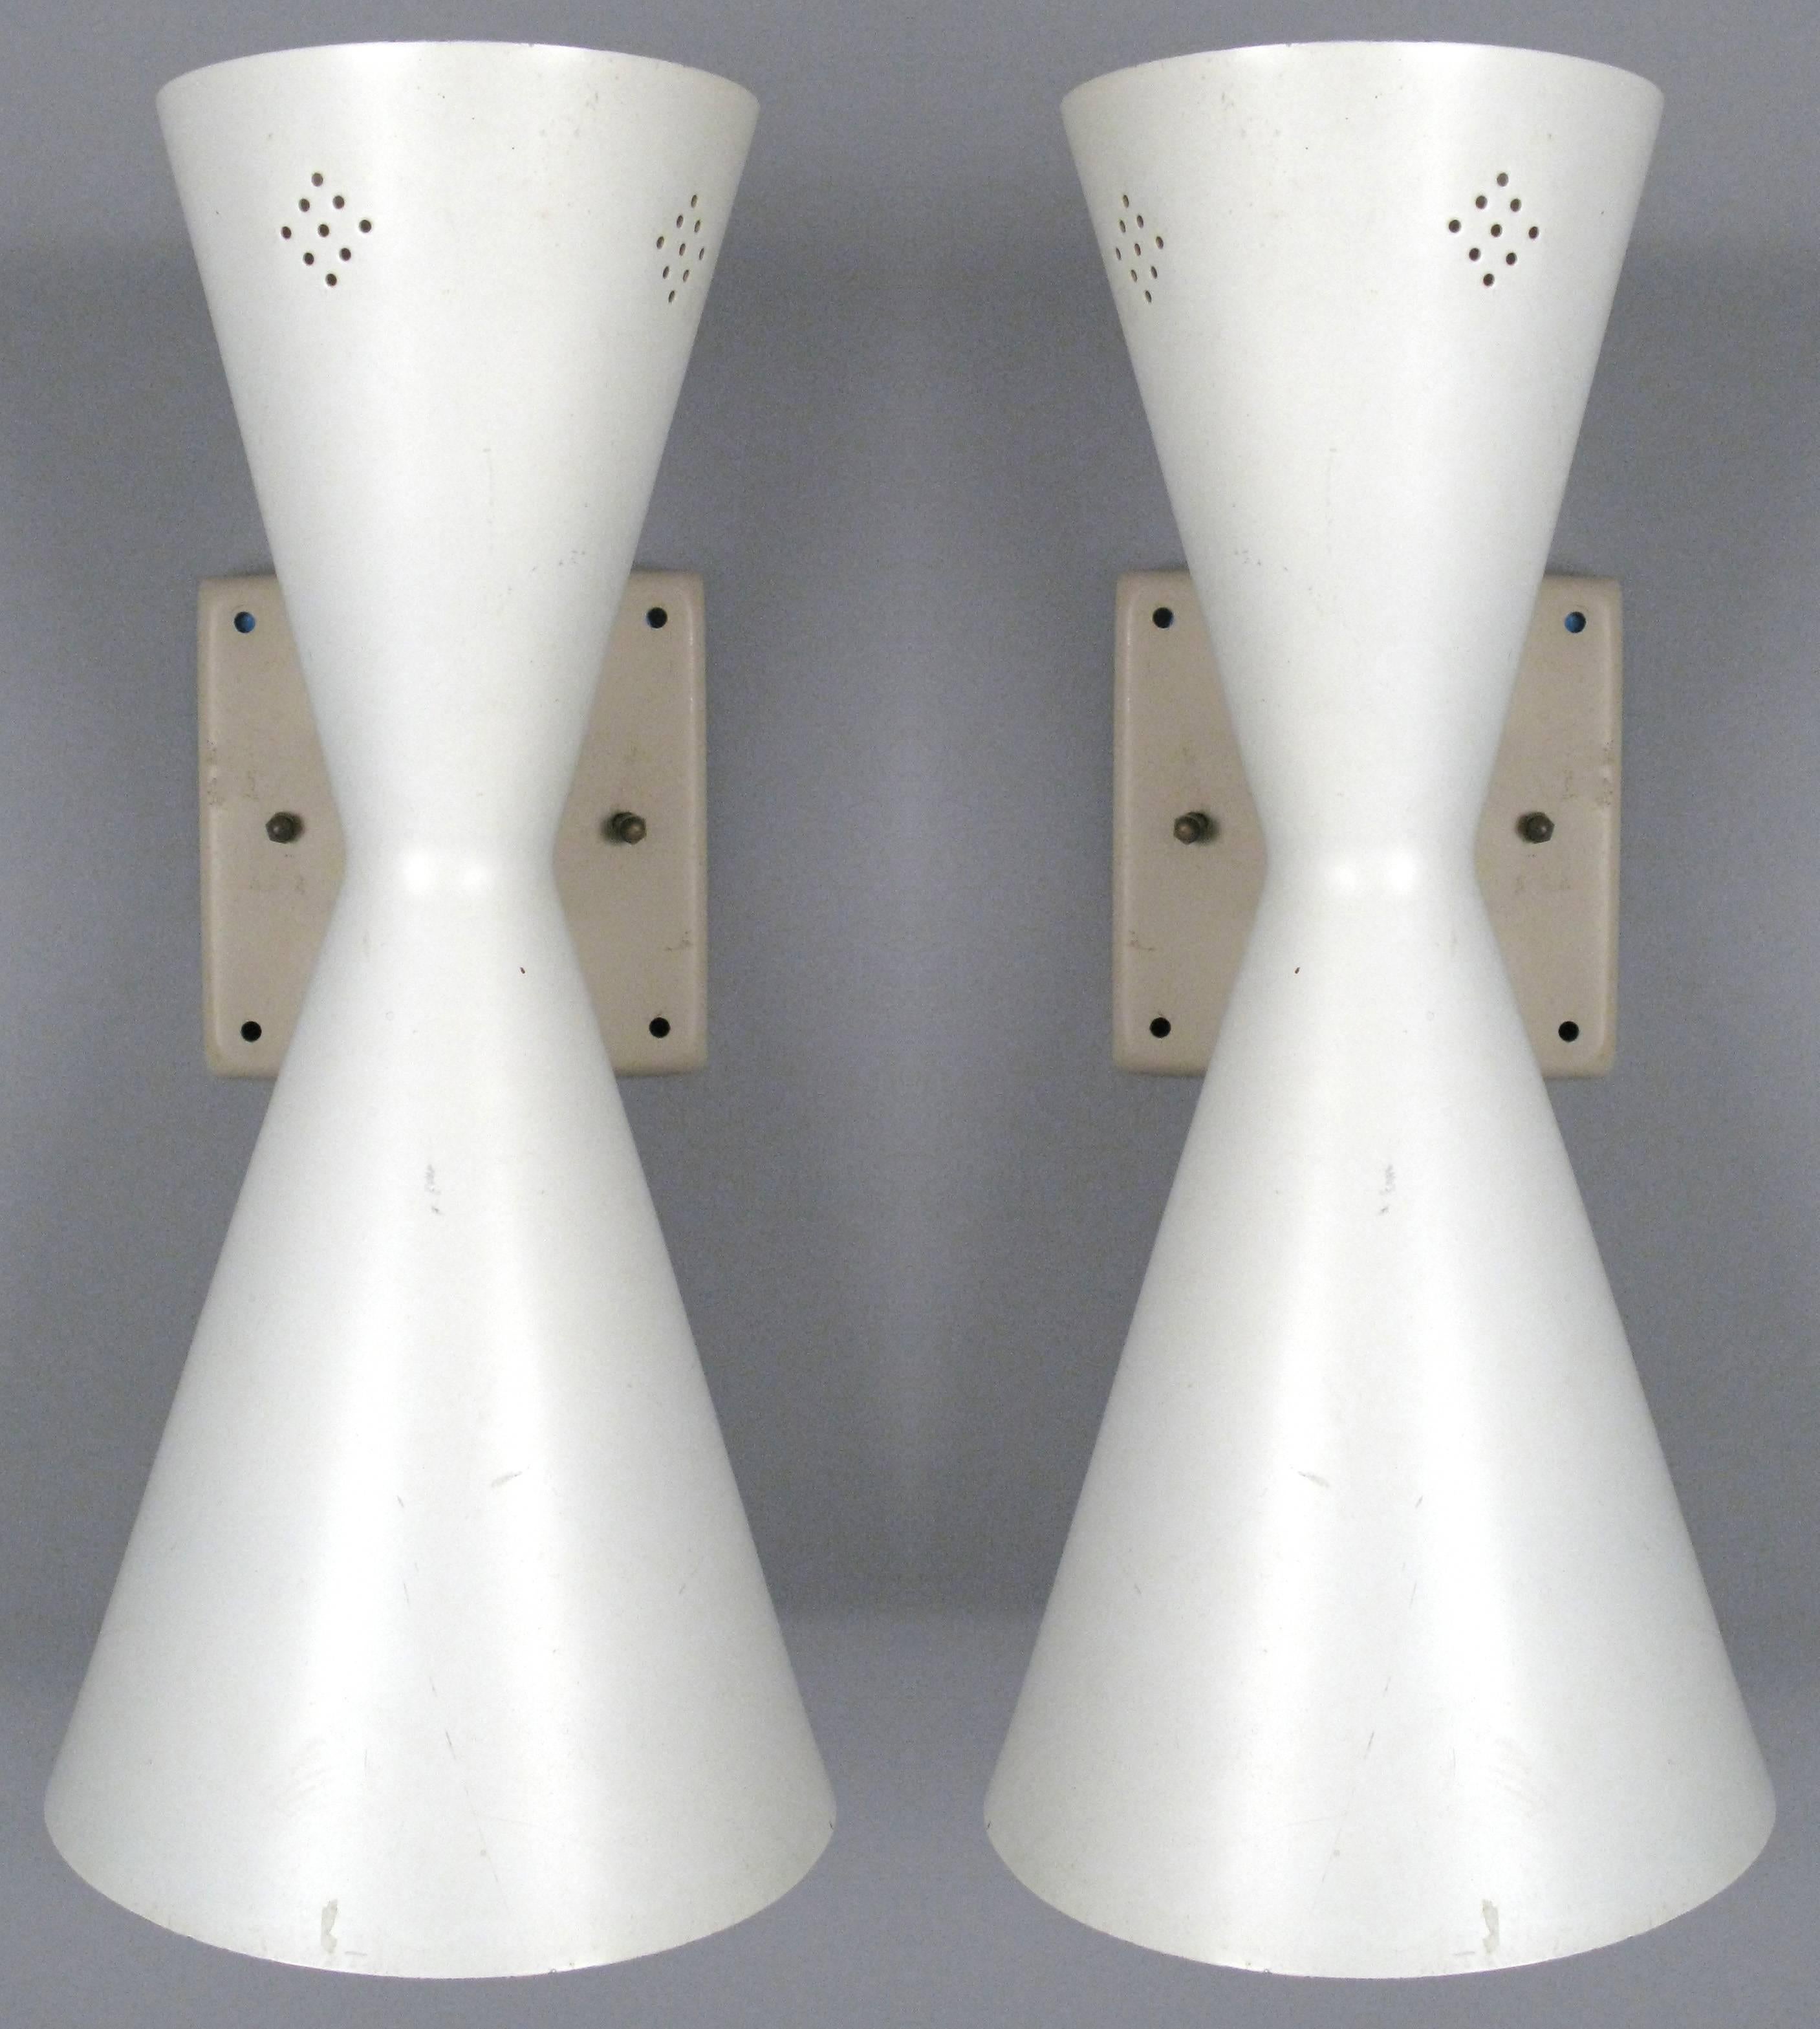 a pair of classic 1950's mid century wall sconces with double cone design. each sconce has a larger down facing cone, and a smaller uplight cone, each one with a socket. so there are a total of four sockets in the pair of sconces. the uplight is